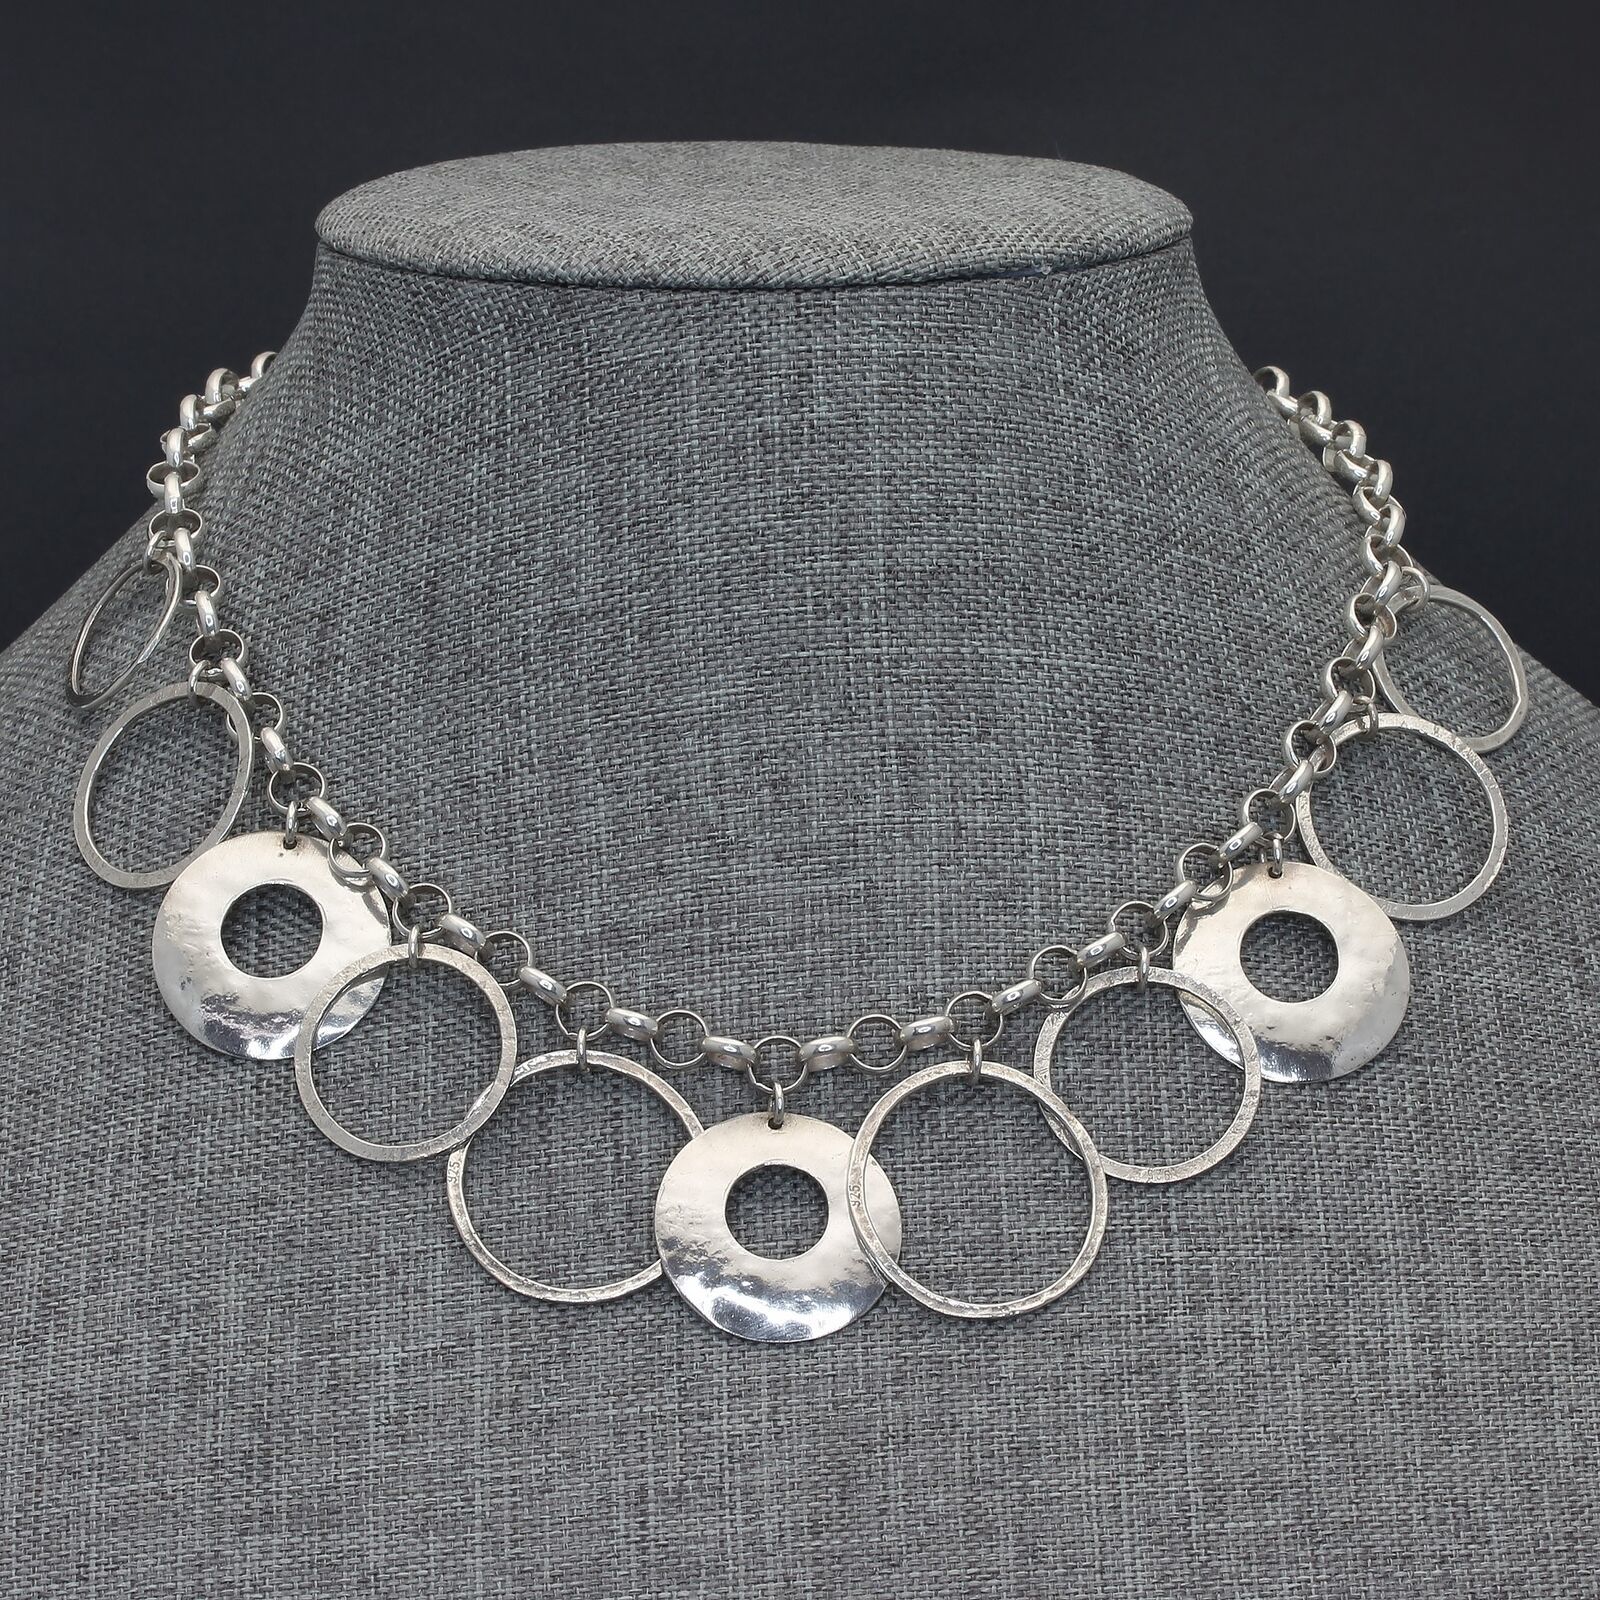 Retired Silpada Sterling Silver Rings Hammered Circles Rolo Chain Necklace N1325 - $49.99